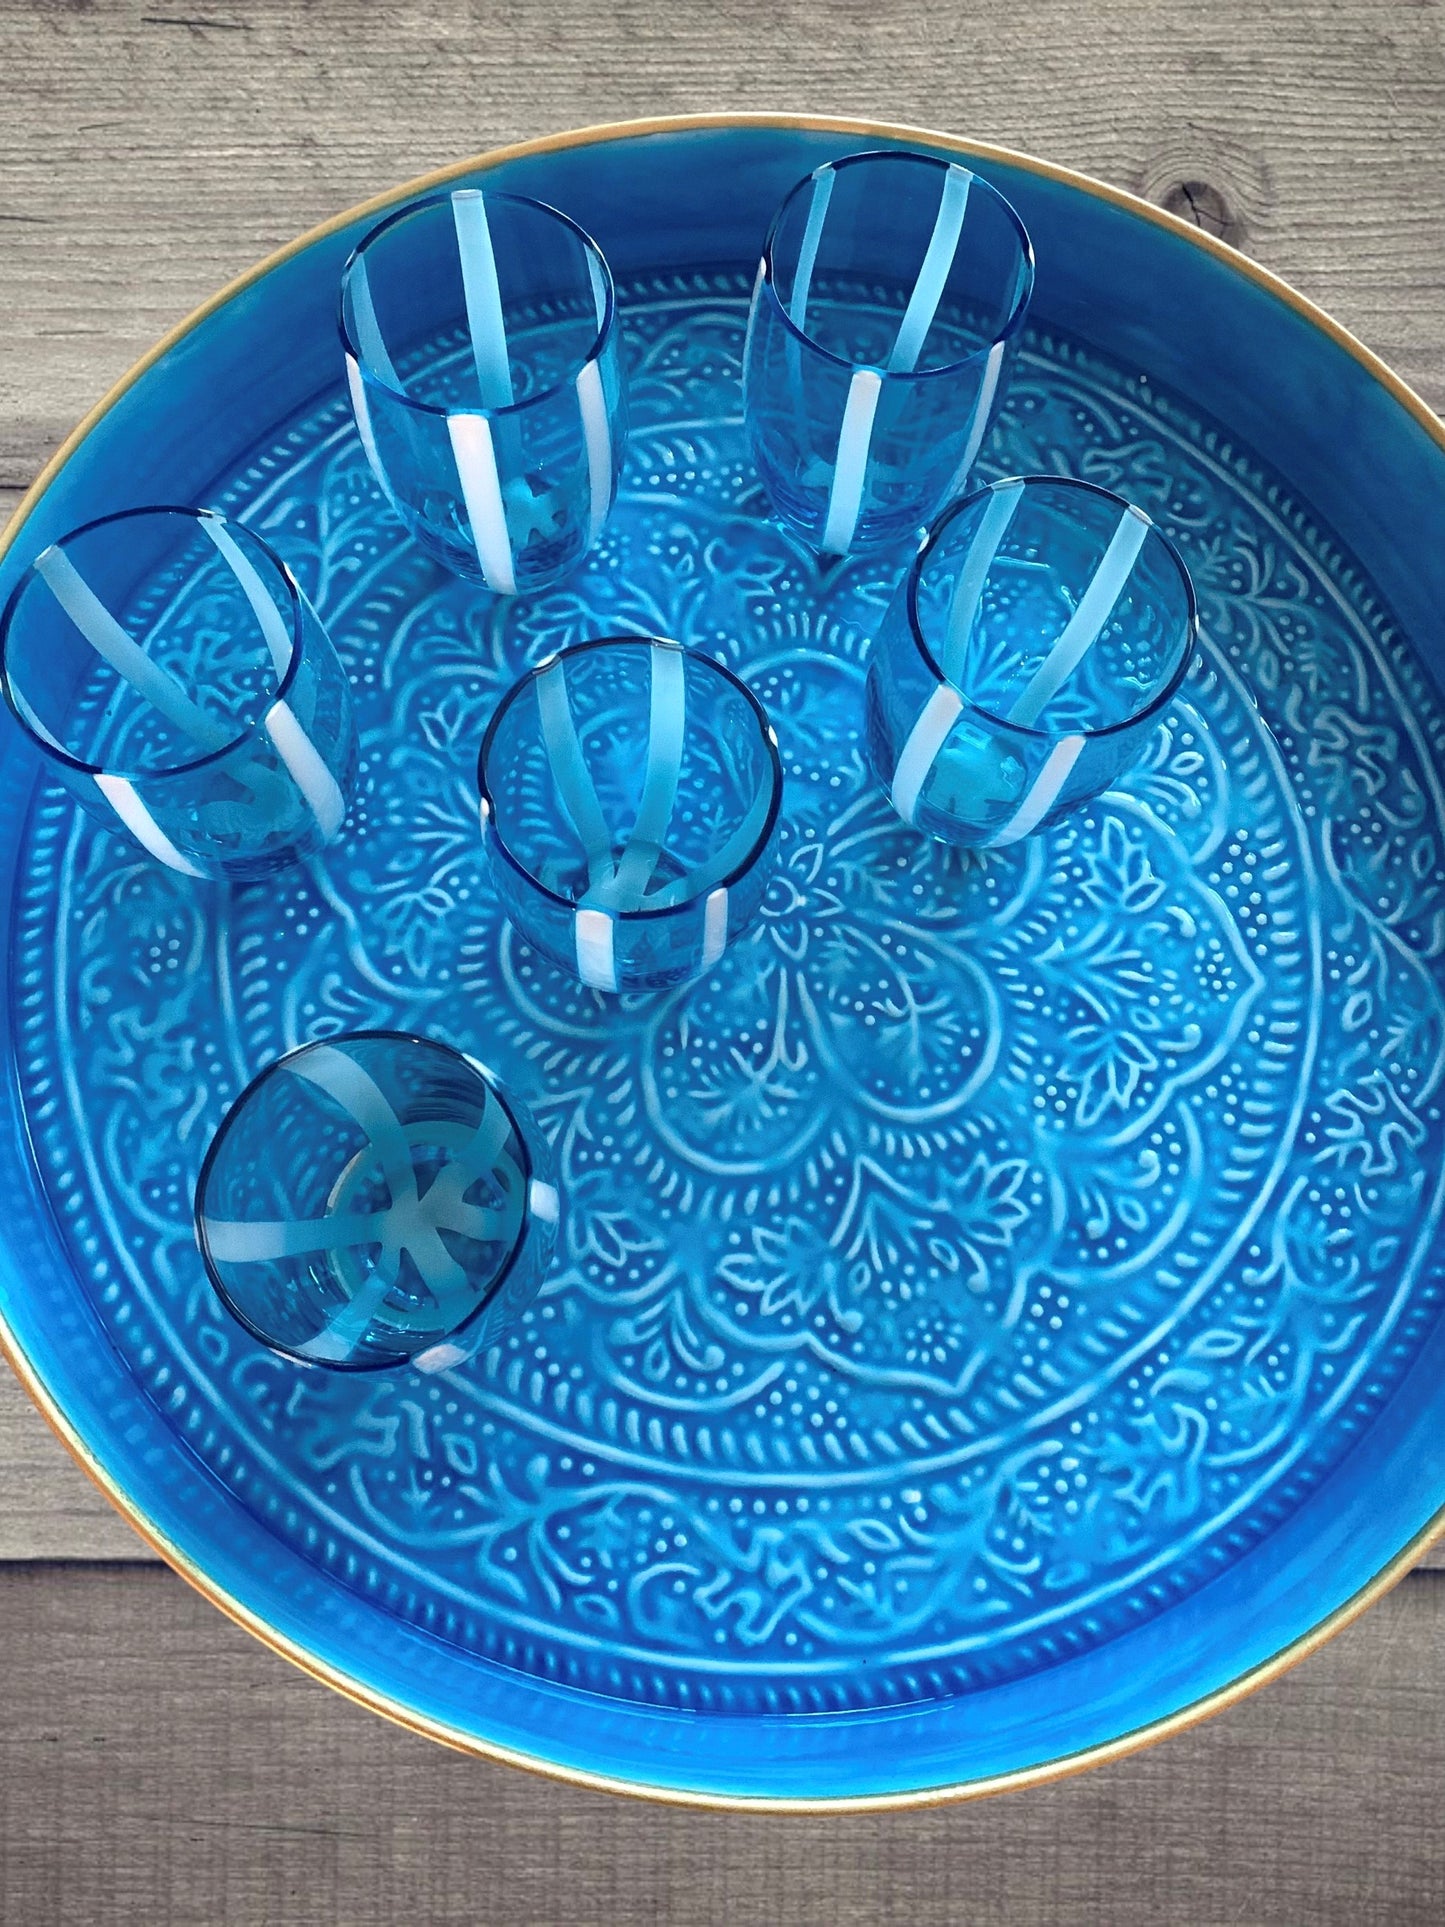 A blue enamel tray on a table with 6 blue and white striped glass tumblers.